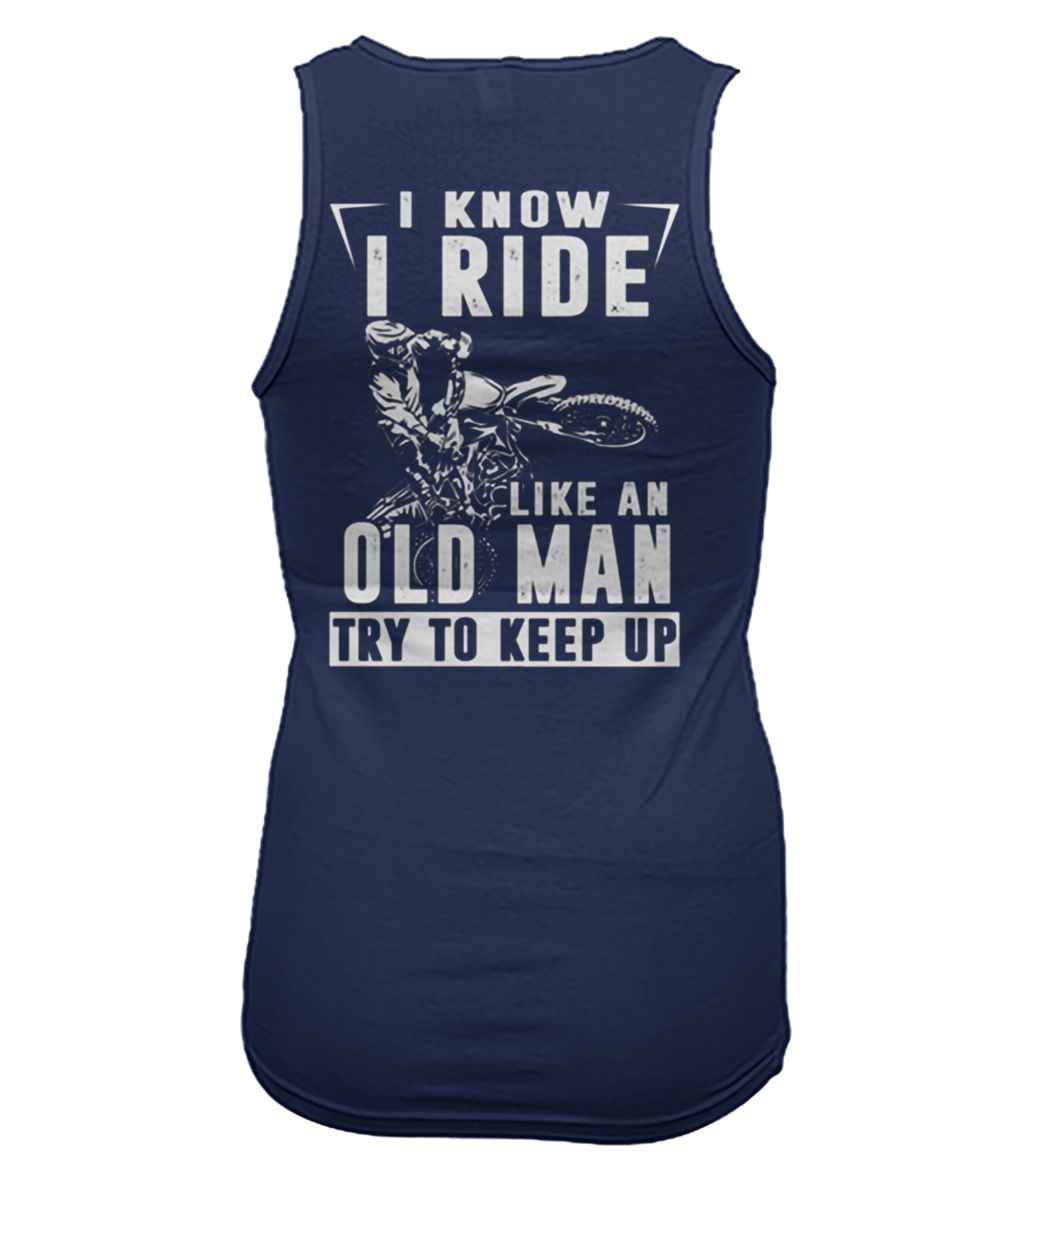 I know I ride like an old man try to keep up women's tank top